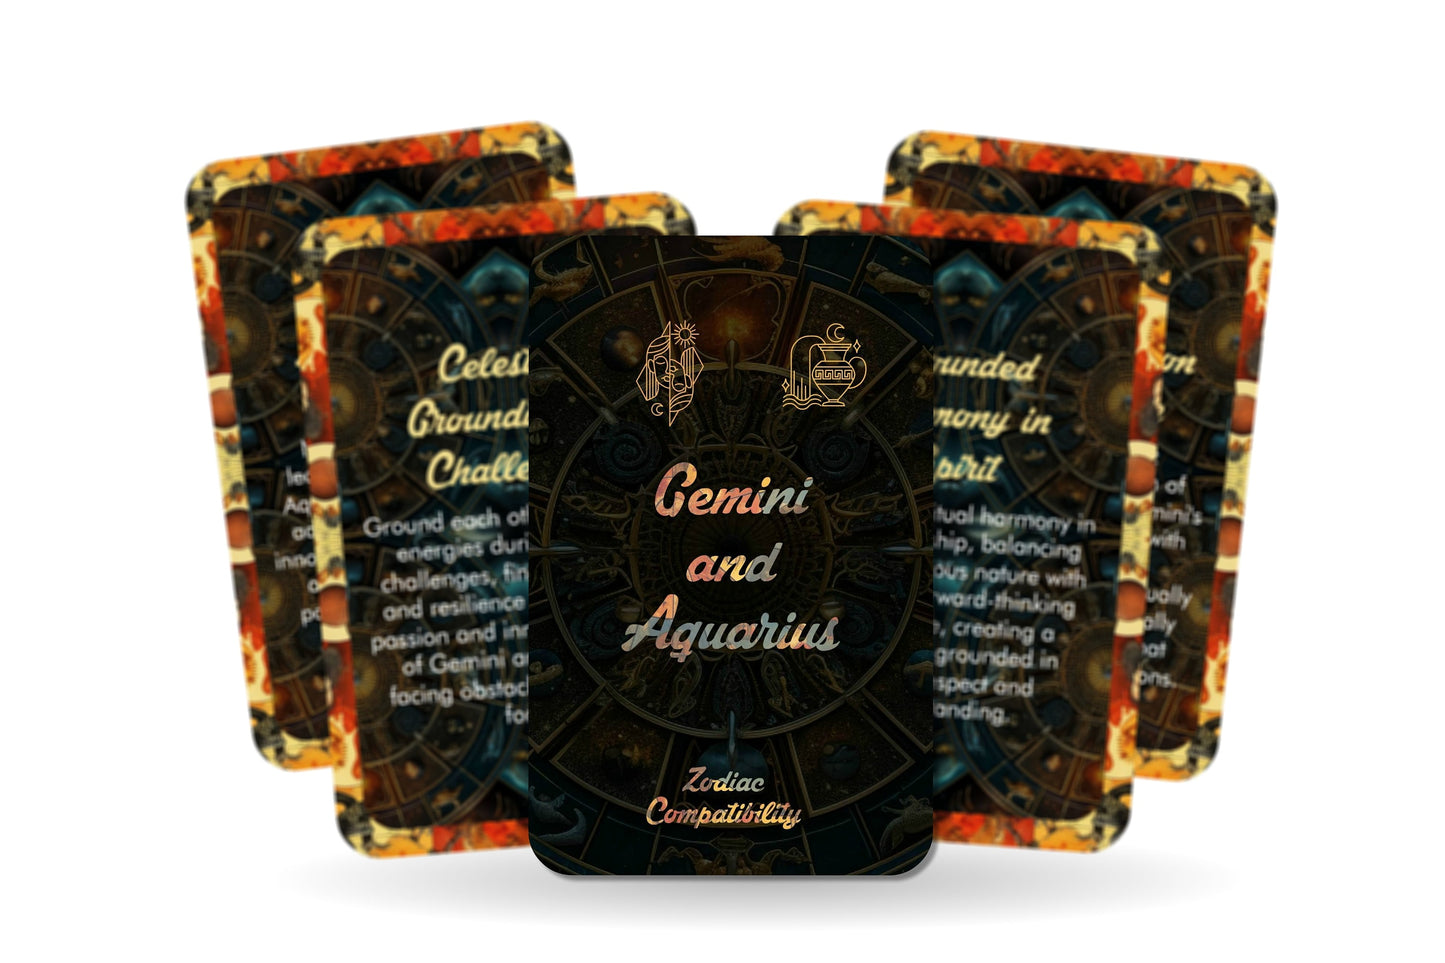 Gemini and Aquarius - Zodiac Compatibility - Divination tools - Oracle cards - Star Sign Compatibility - Horoscope Compatibility Cards